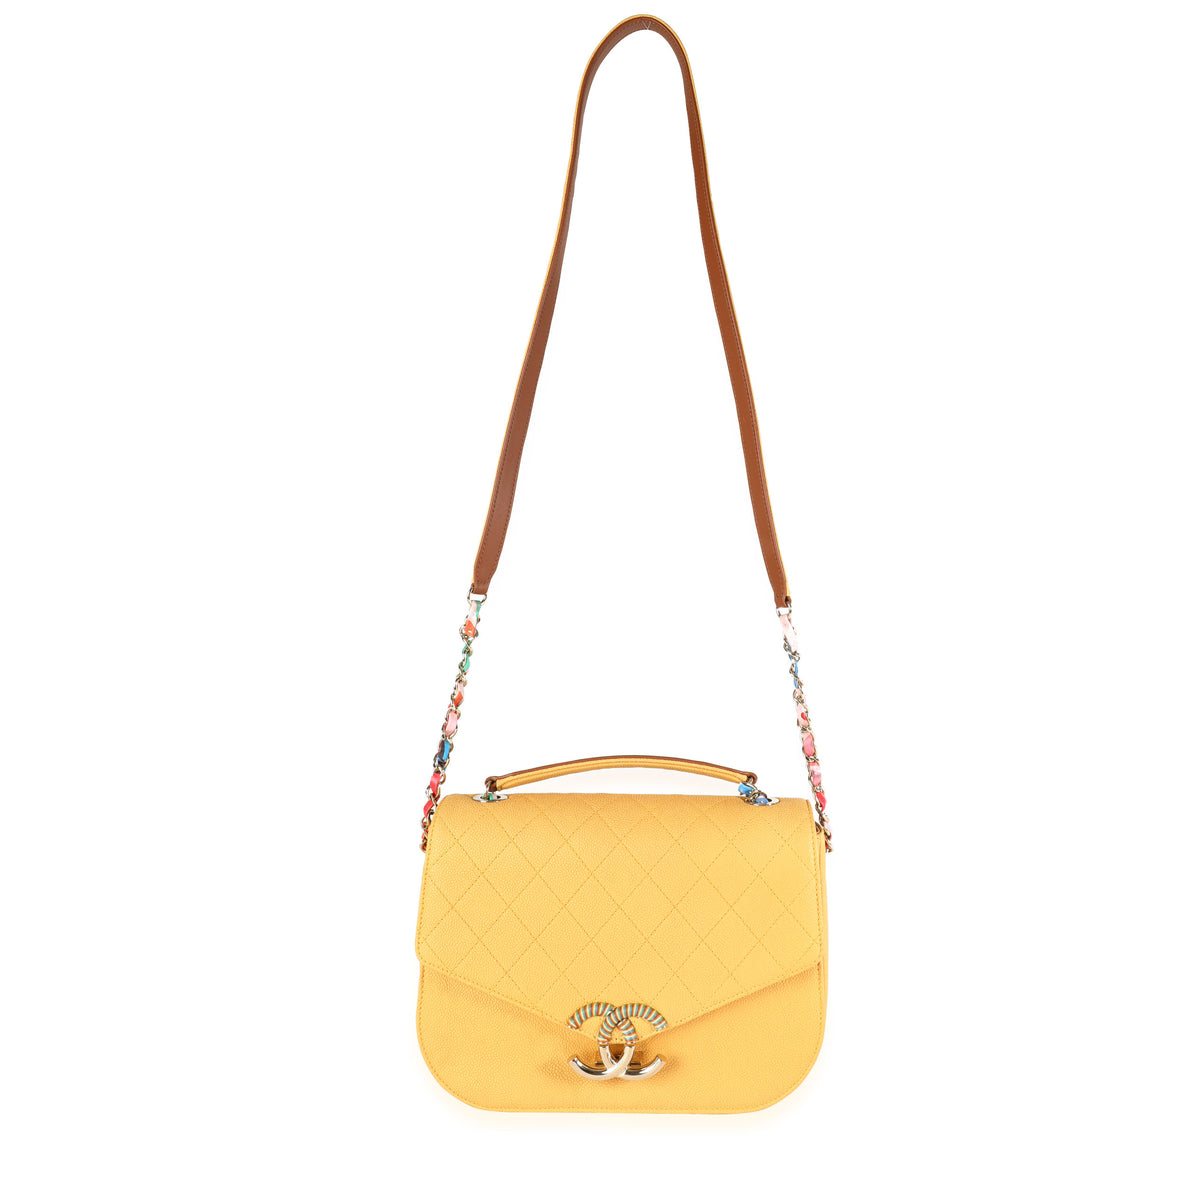 Chanel Yellow Caviar Quilted Leather Cuba Flap Bag